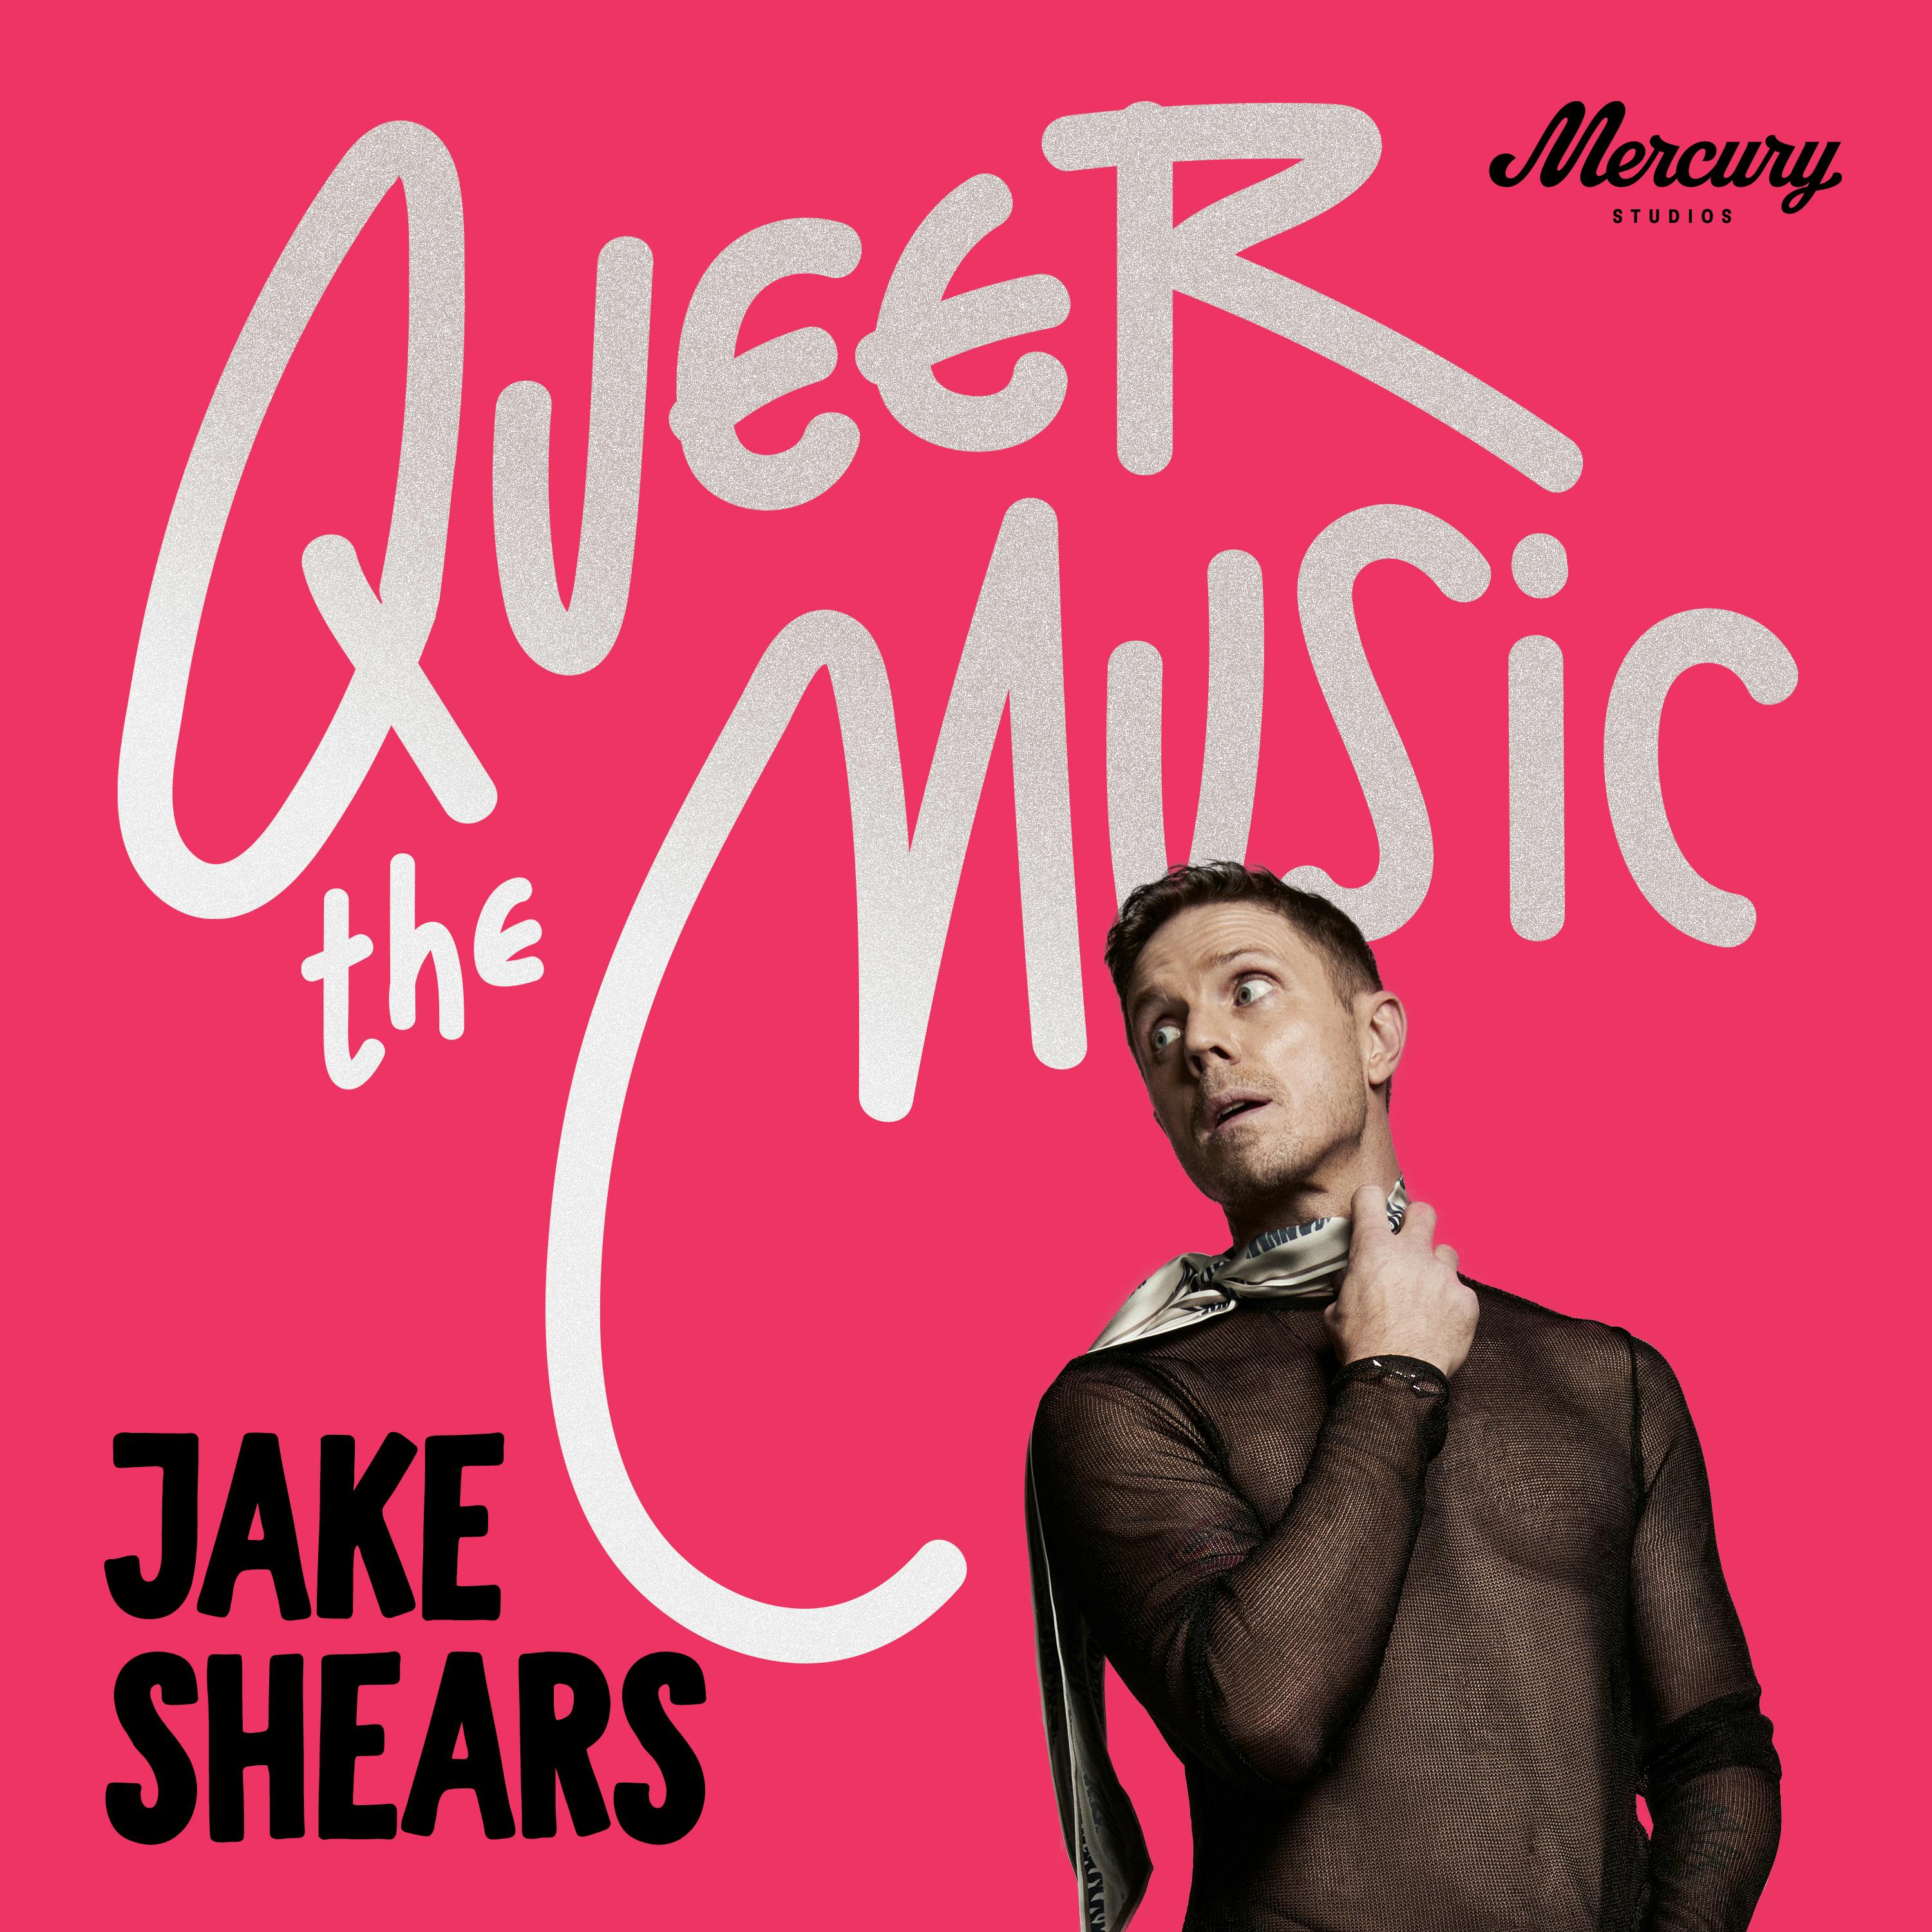 Queer The Music: Jake Shears On The Songs That Changed Lives podcast show image